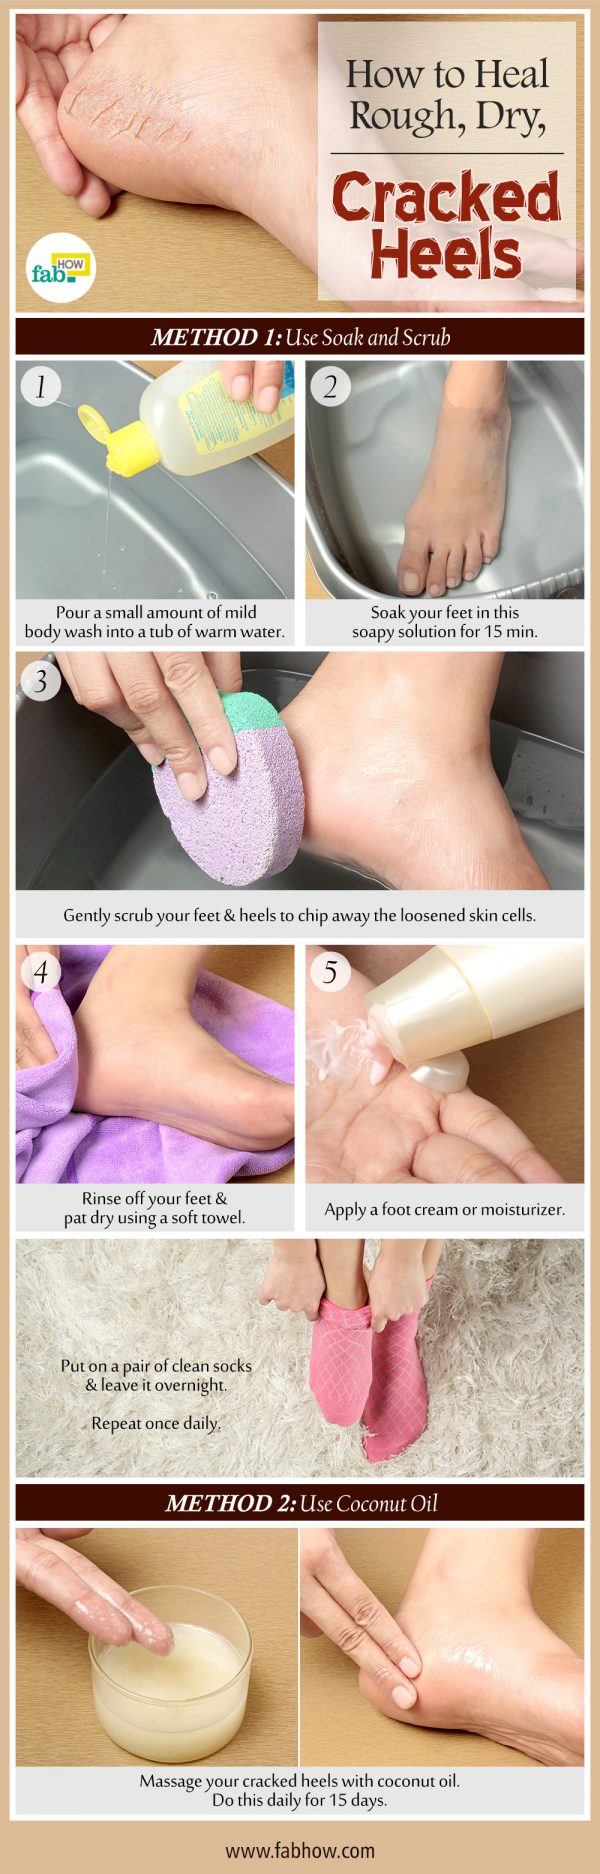 how to heal cracked heels infographic